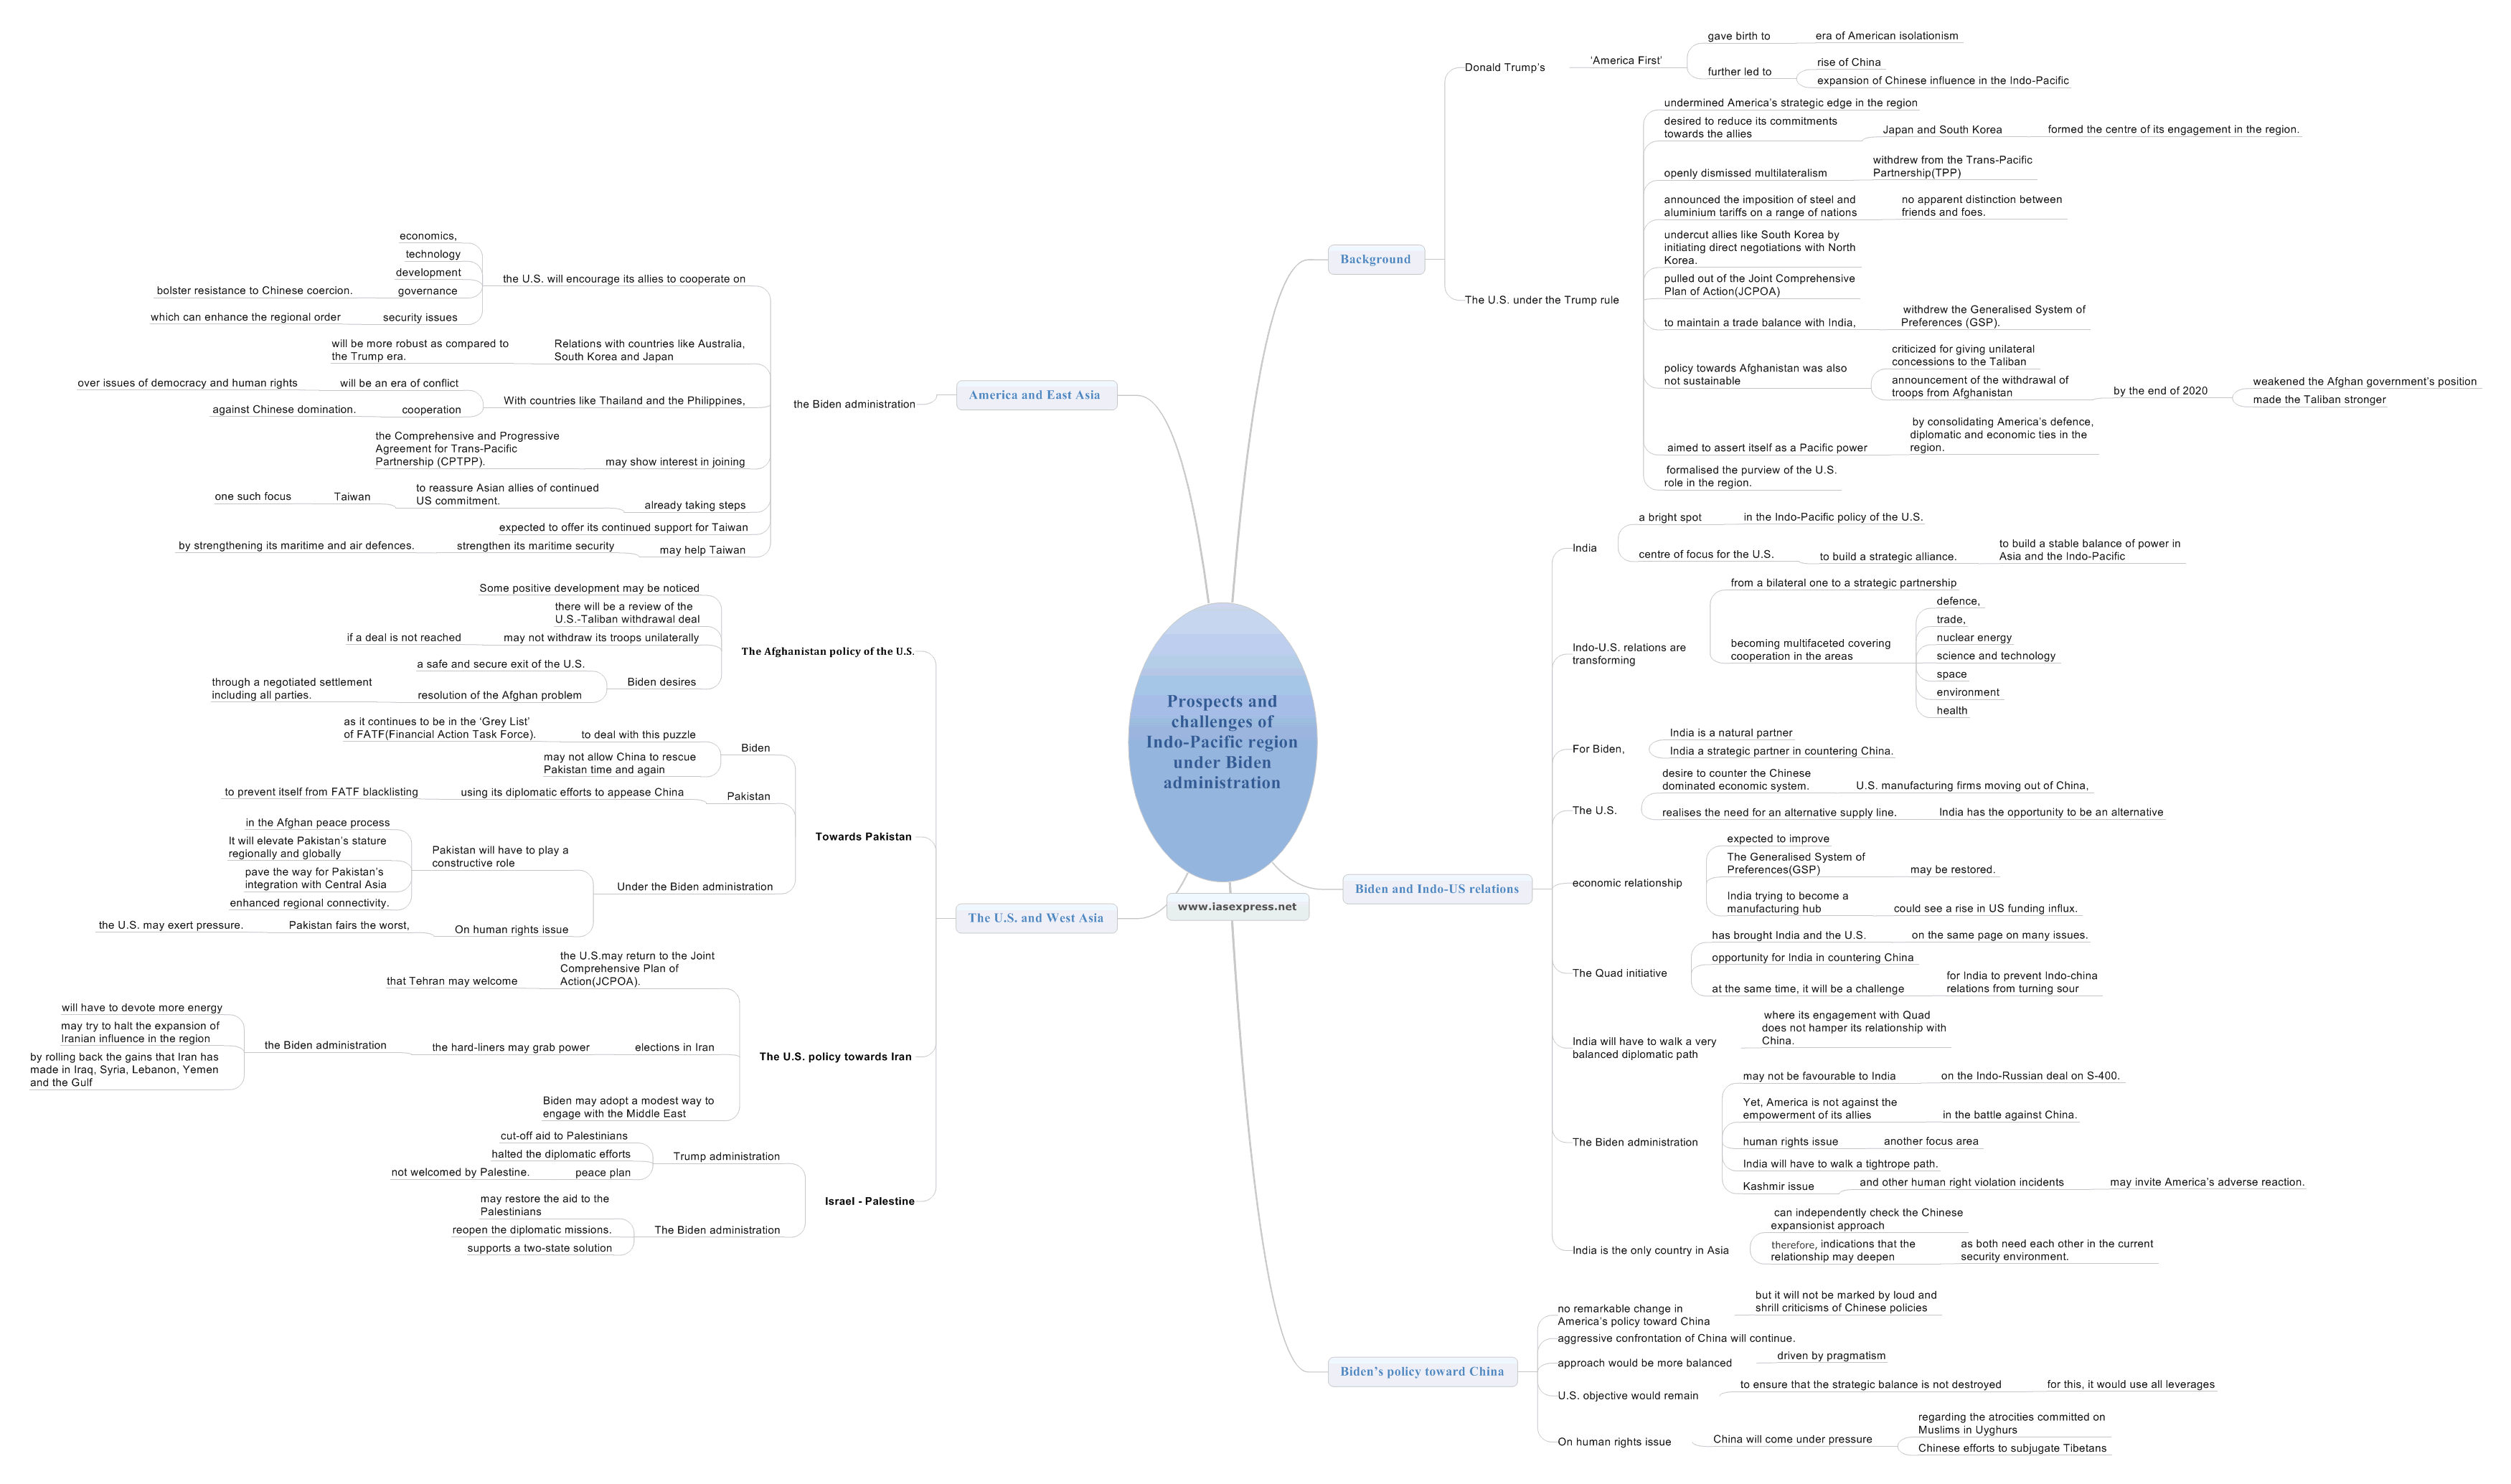  Prospects and challenges of Indo-Pacific region under Biden administration mindmap